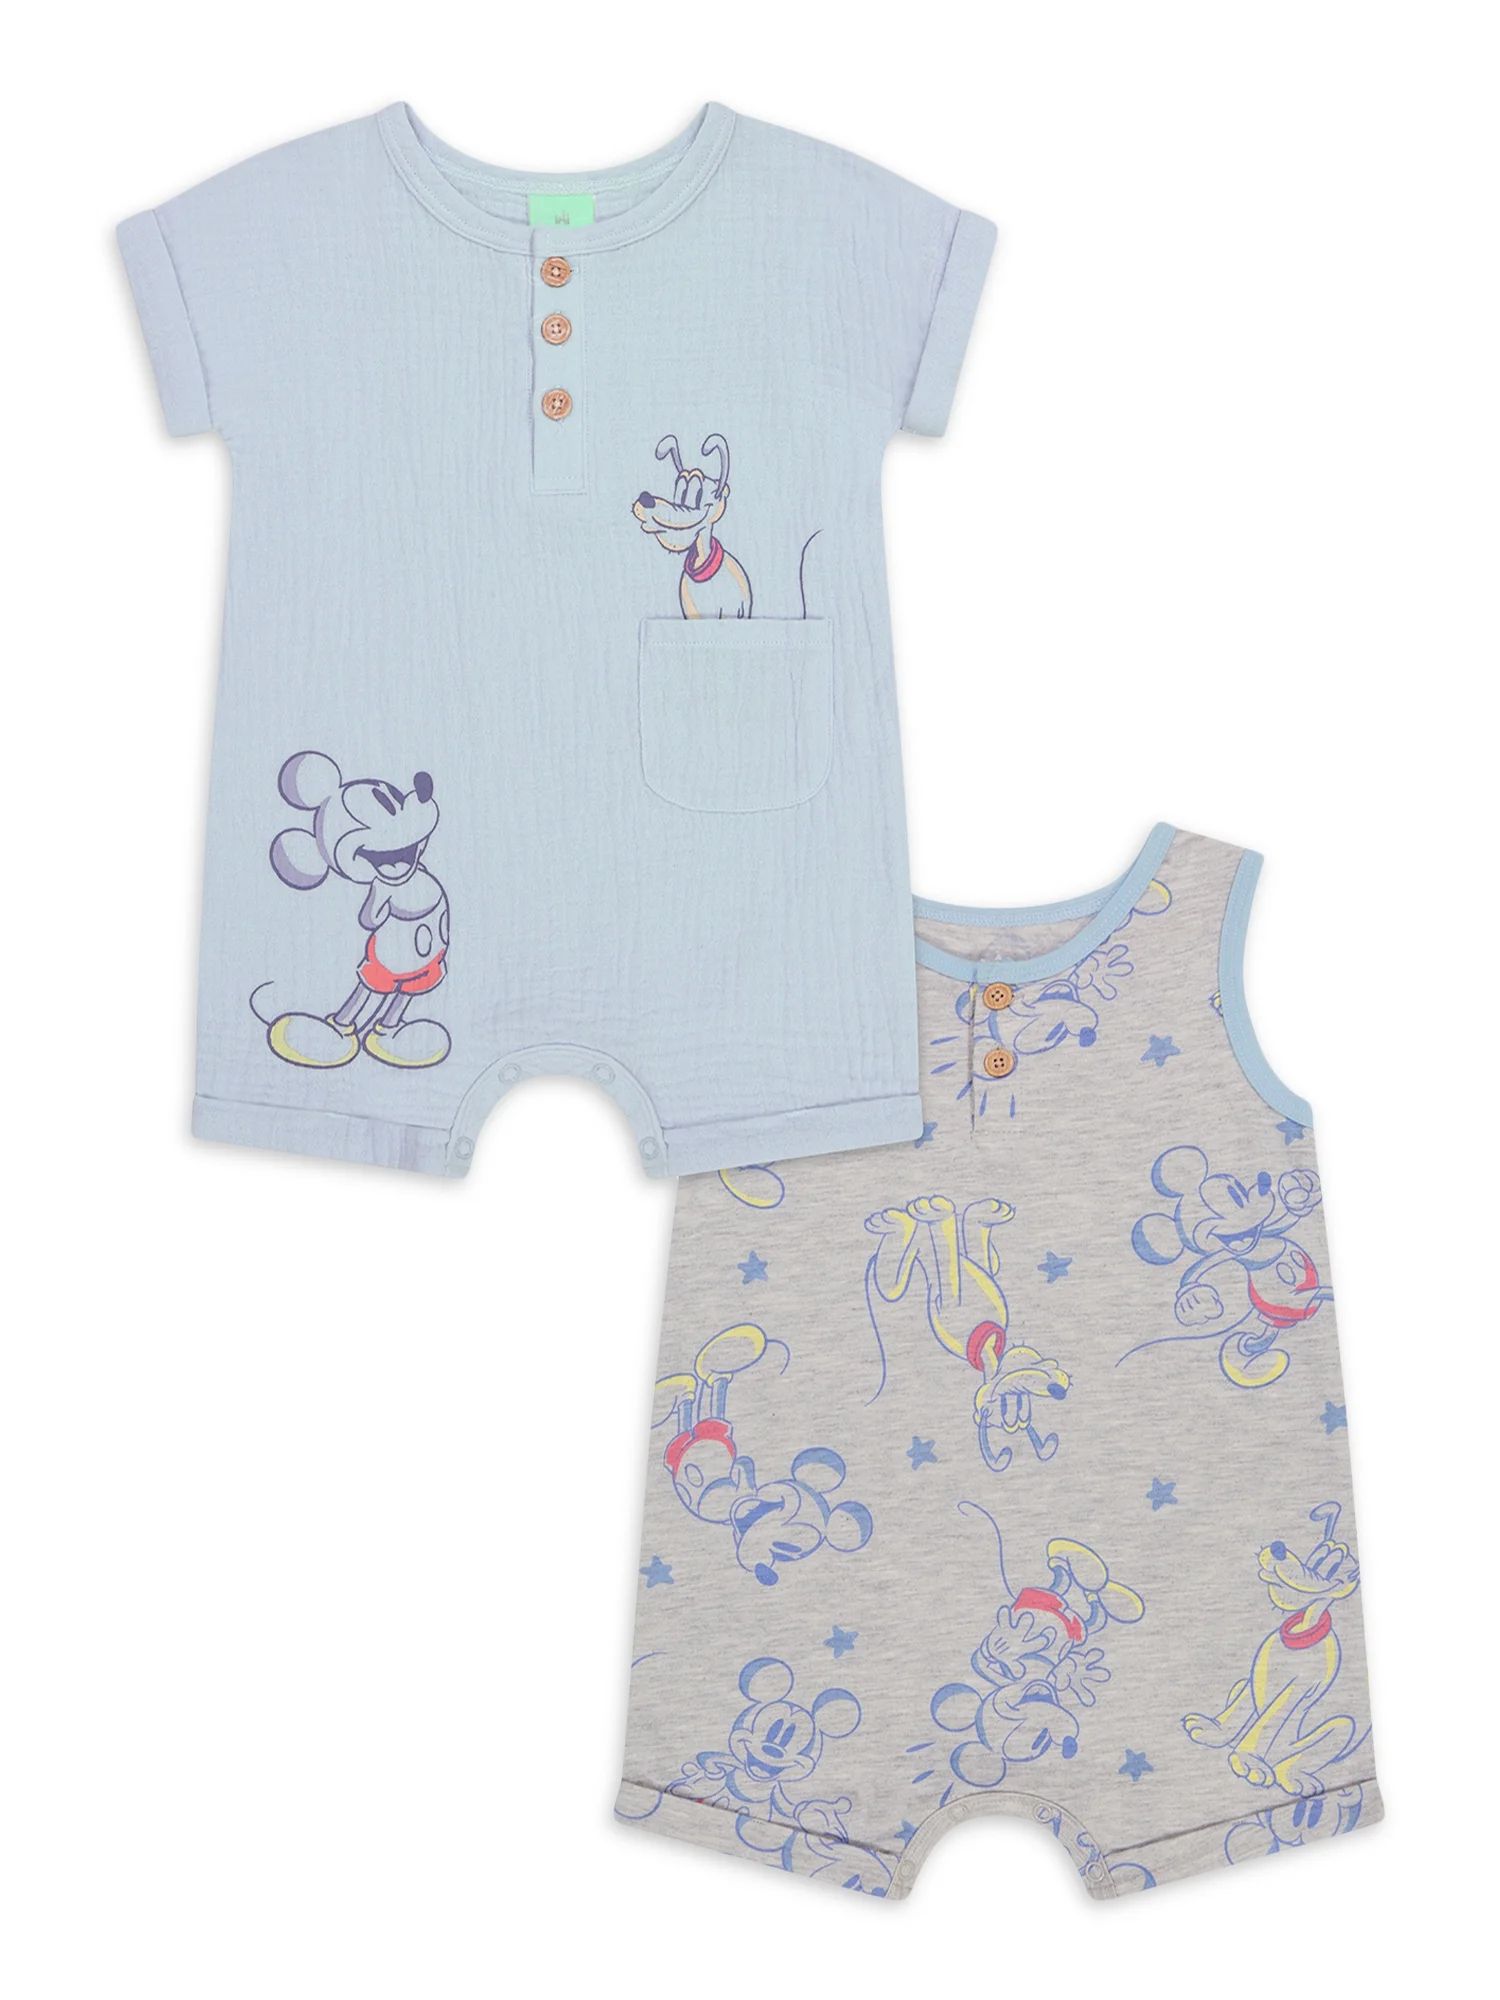 Mickey & Friends Infant Boys Short Sleeve and Sleeveless Rompers Set, 2-Piece, Sizes 0/3M-24M | Walmart (US)